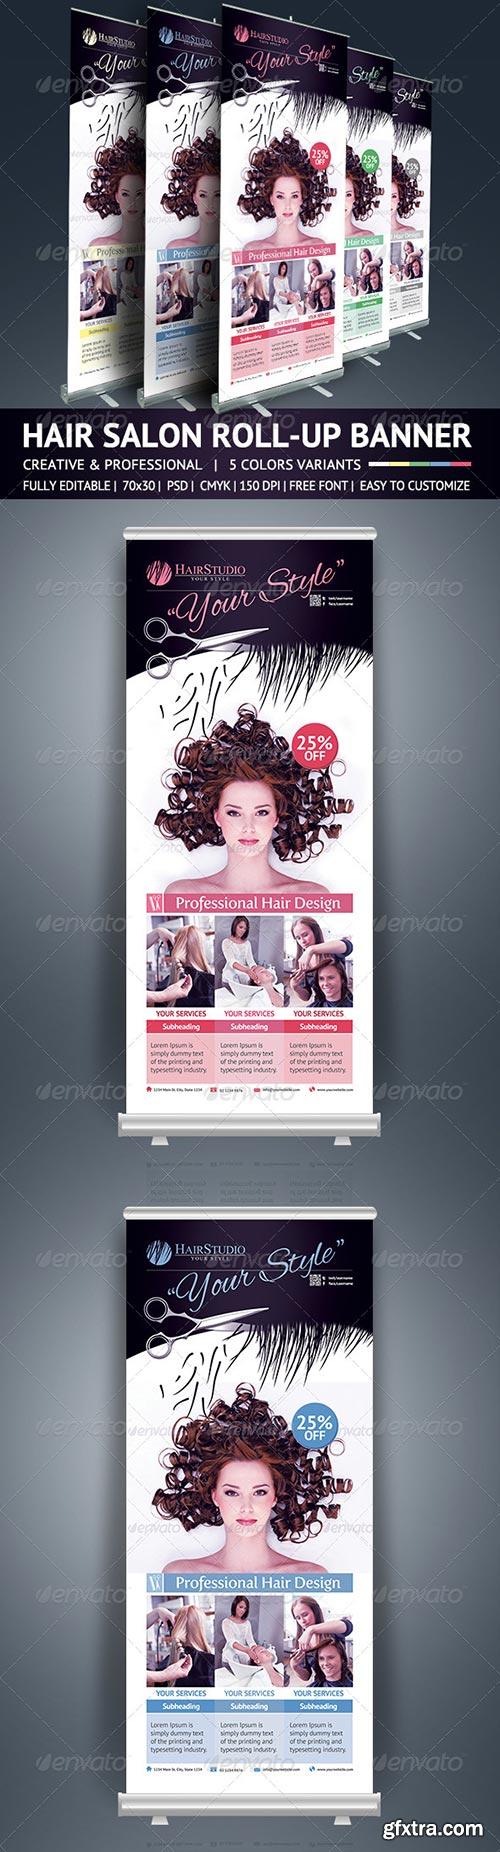 GraphicRiver - Hair Salon Roll Up Banner 5765657